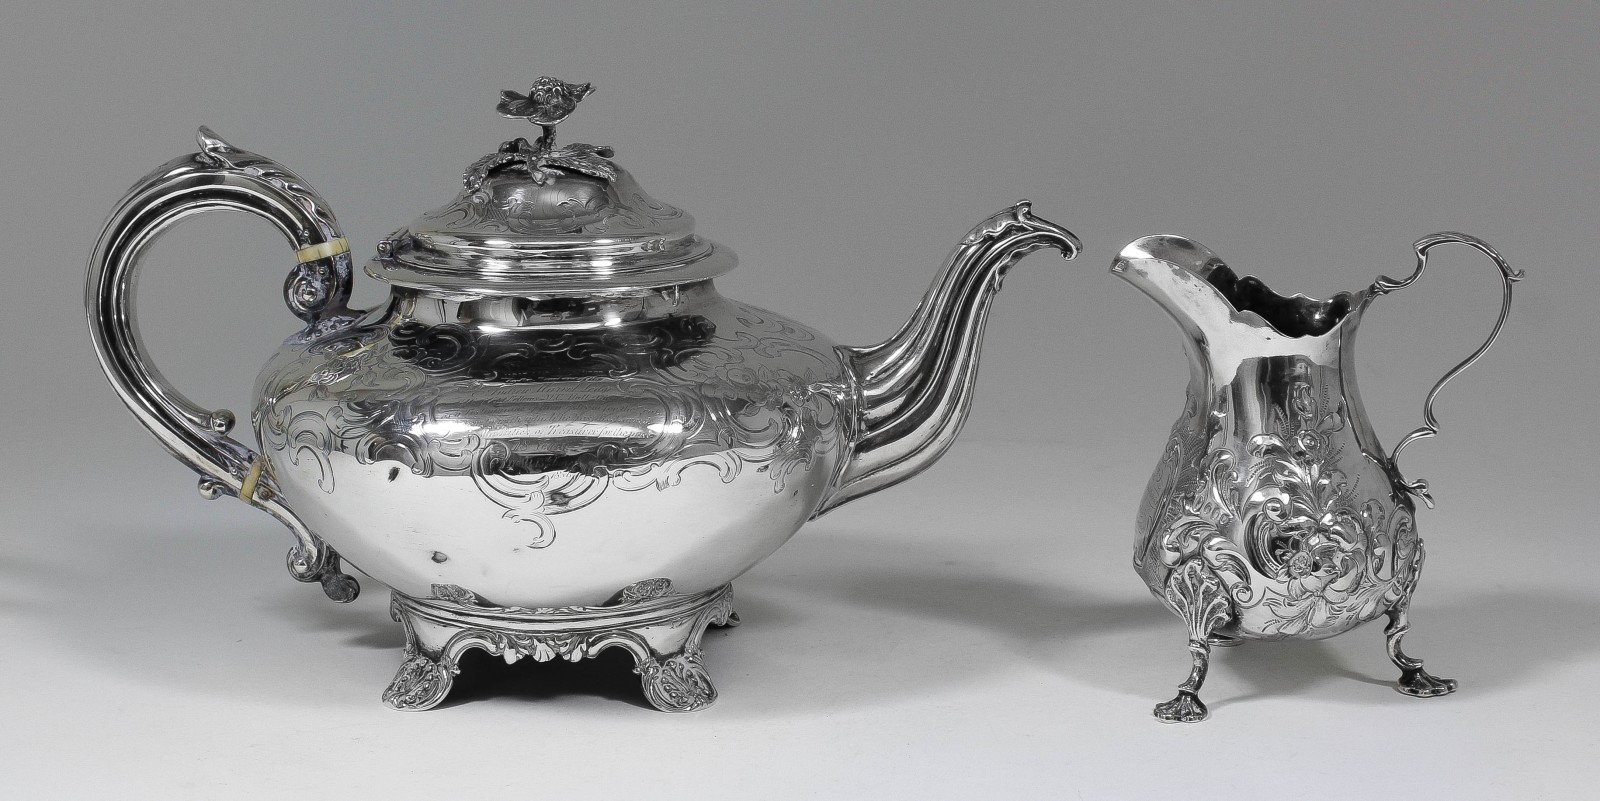 A Victorian silver circular teapot engraved with scroll and floral ornament, with floral cast